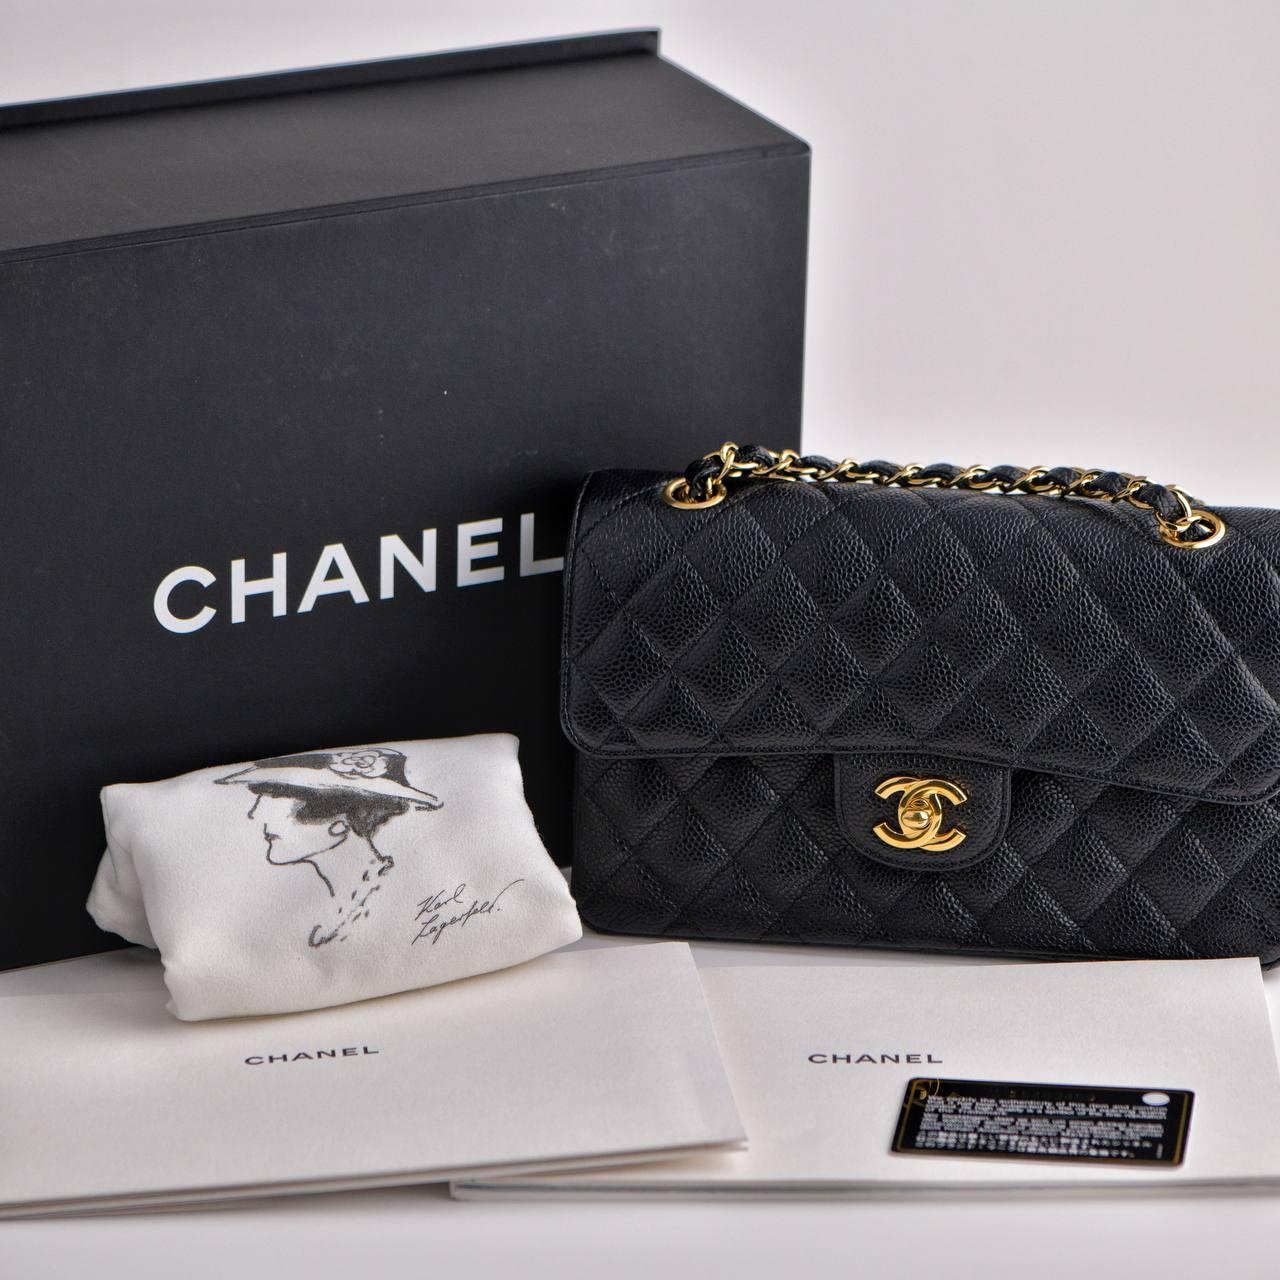 SKU 	AT-1625
Brand	Chanel
Model	Small Double Flap
Plaque Serial No.	15******
Retail Price:   £8,180 / $9,600 /9,300 €
_________________________________________
Color	Black
Date	Approx. 2011
Metal.      Gold
Material   Calfskin